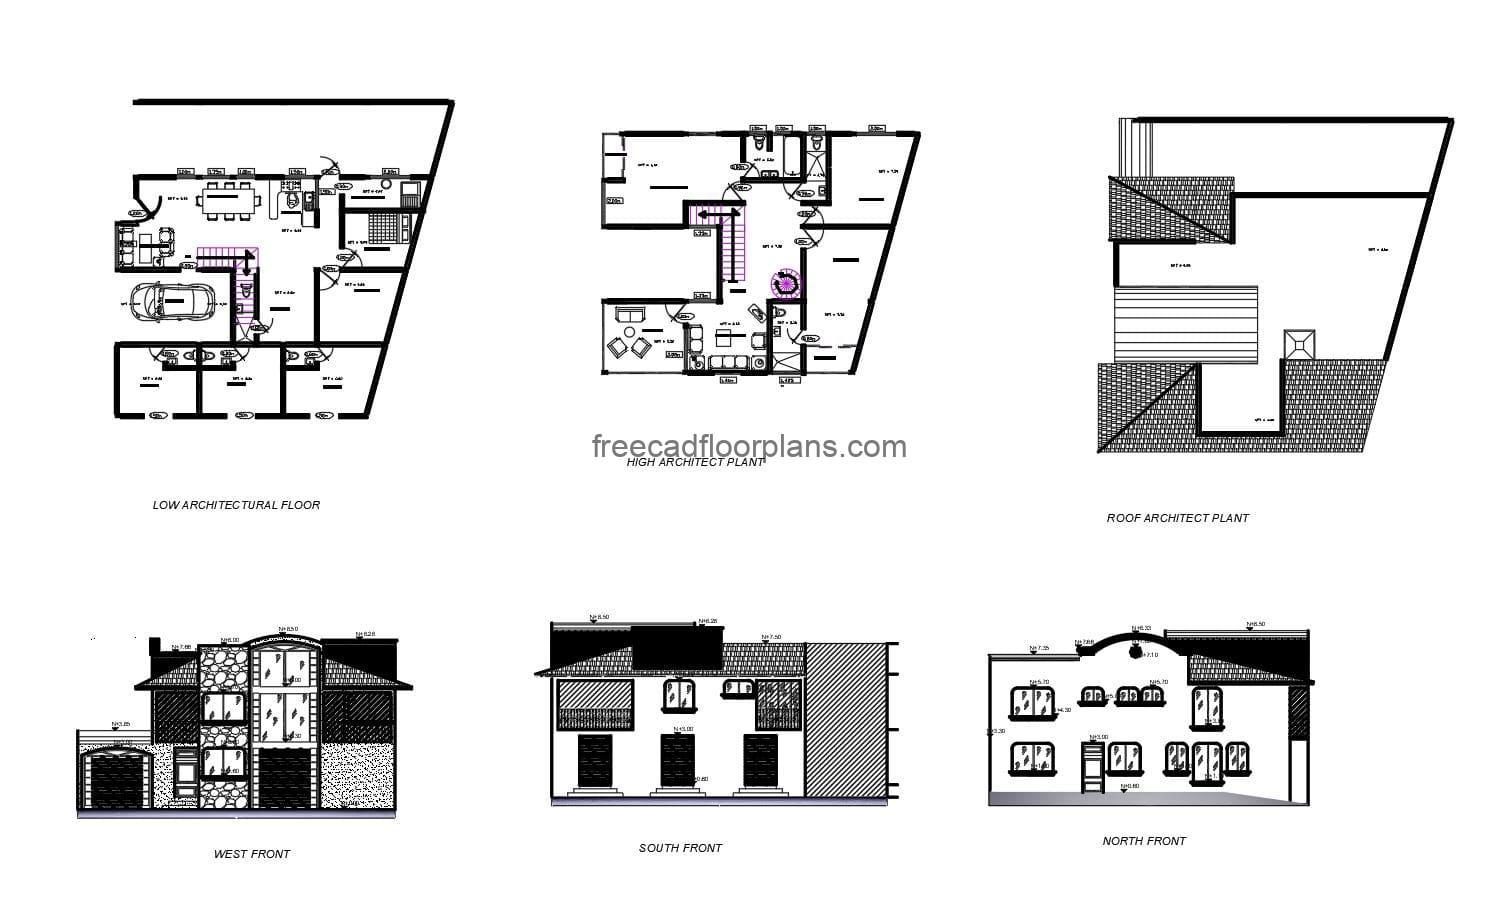 Complete architectural project of a two-level residence with five rooms, all drawings in Autocad DWG format, architectural plans, dimensioning, foundations, details of sanitary and electrical installations. Section views, elevations, structural details, isometric views of sanitary installation in DWG and electrical installation diagrams.